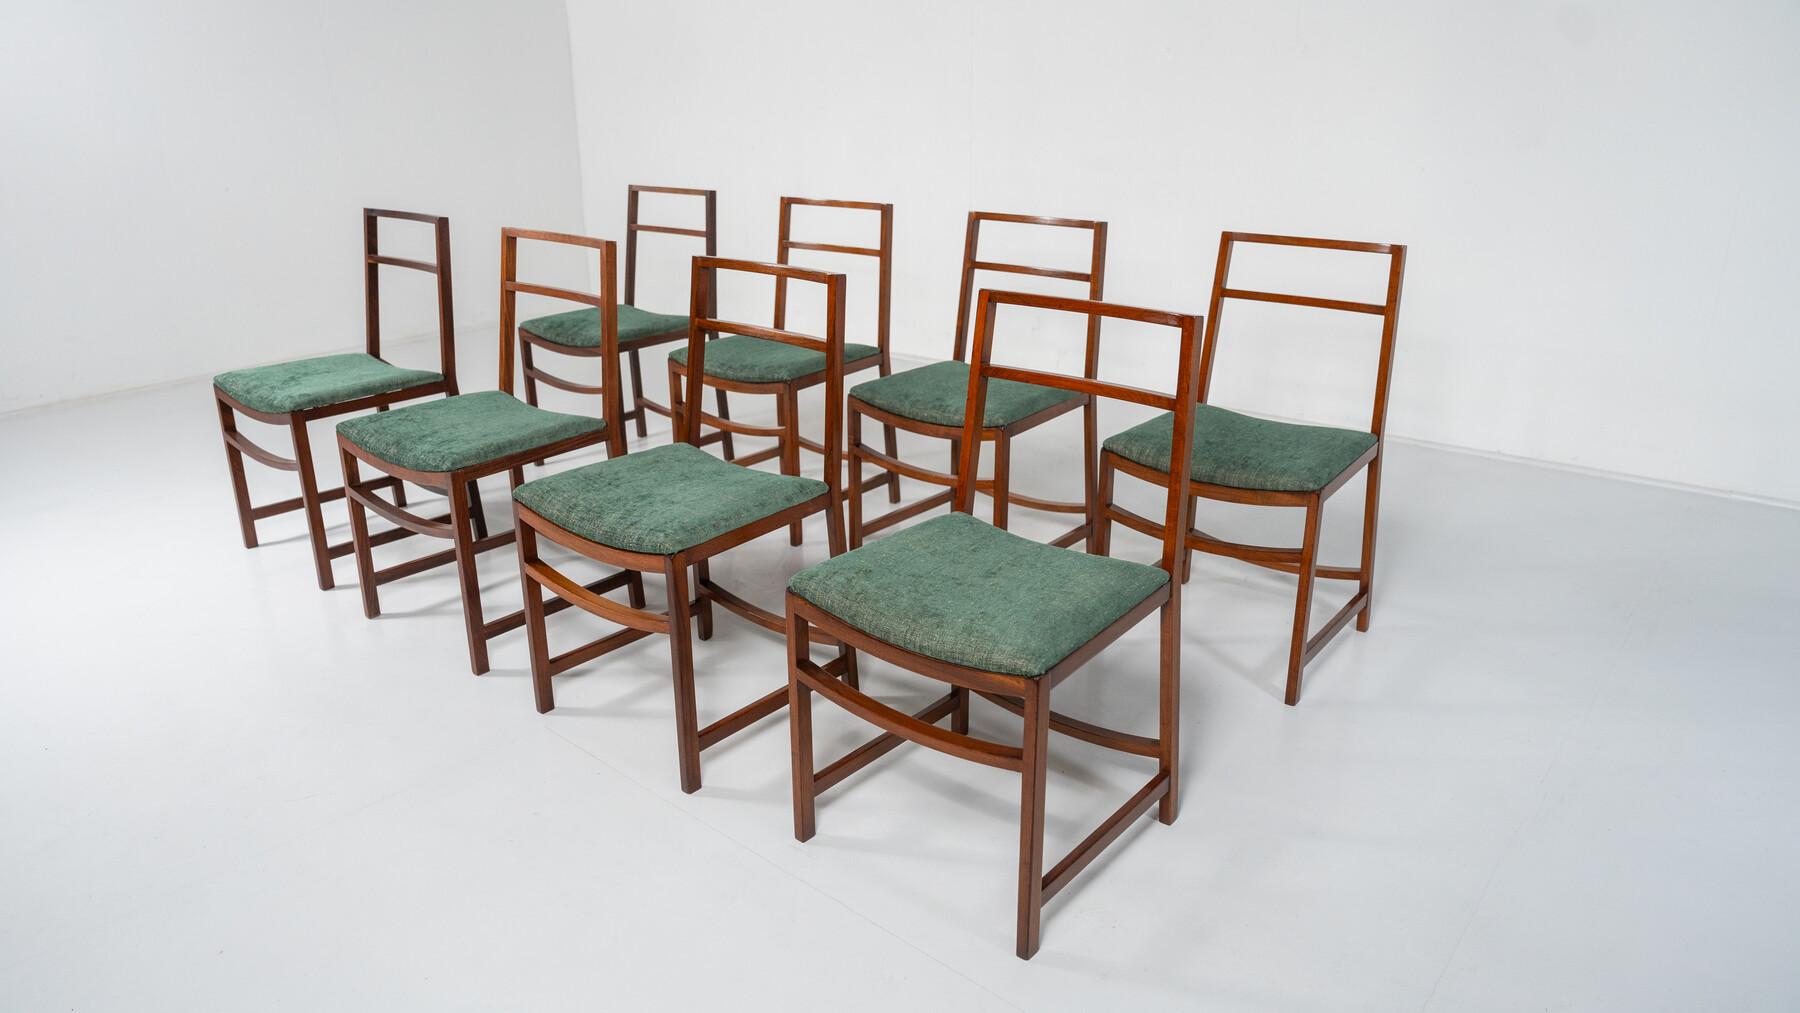 Set of 8 Mid-Century Modern Dining Chairs by Renato Venturi for MIM, 1950s For Sale 2